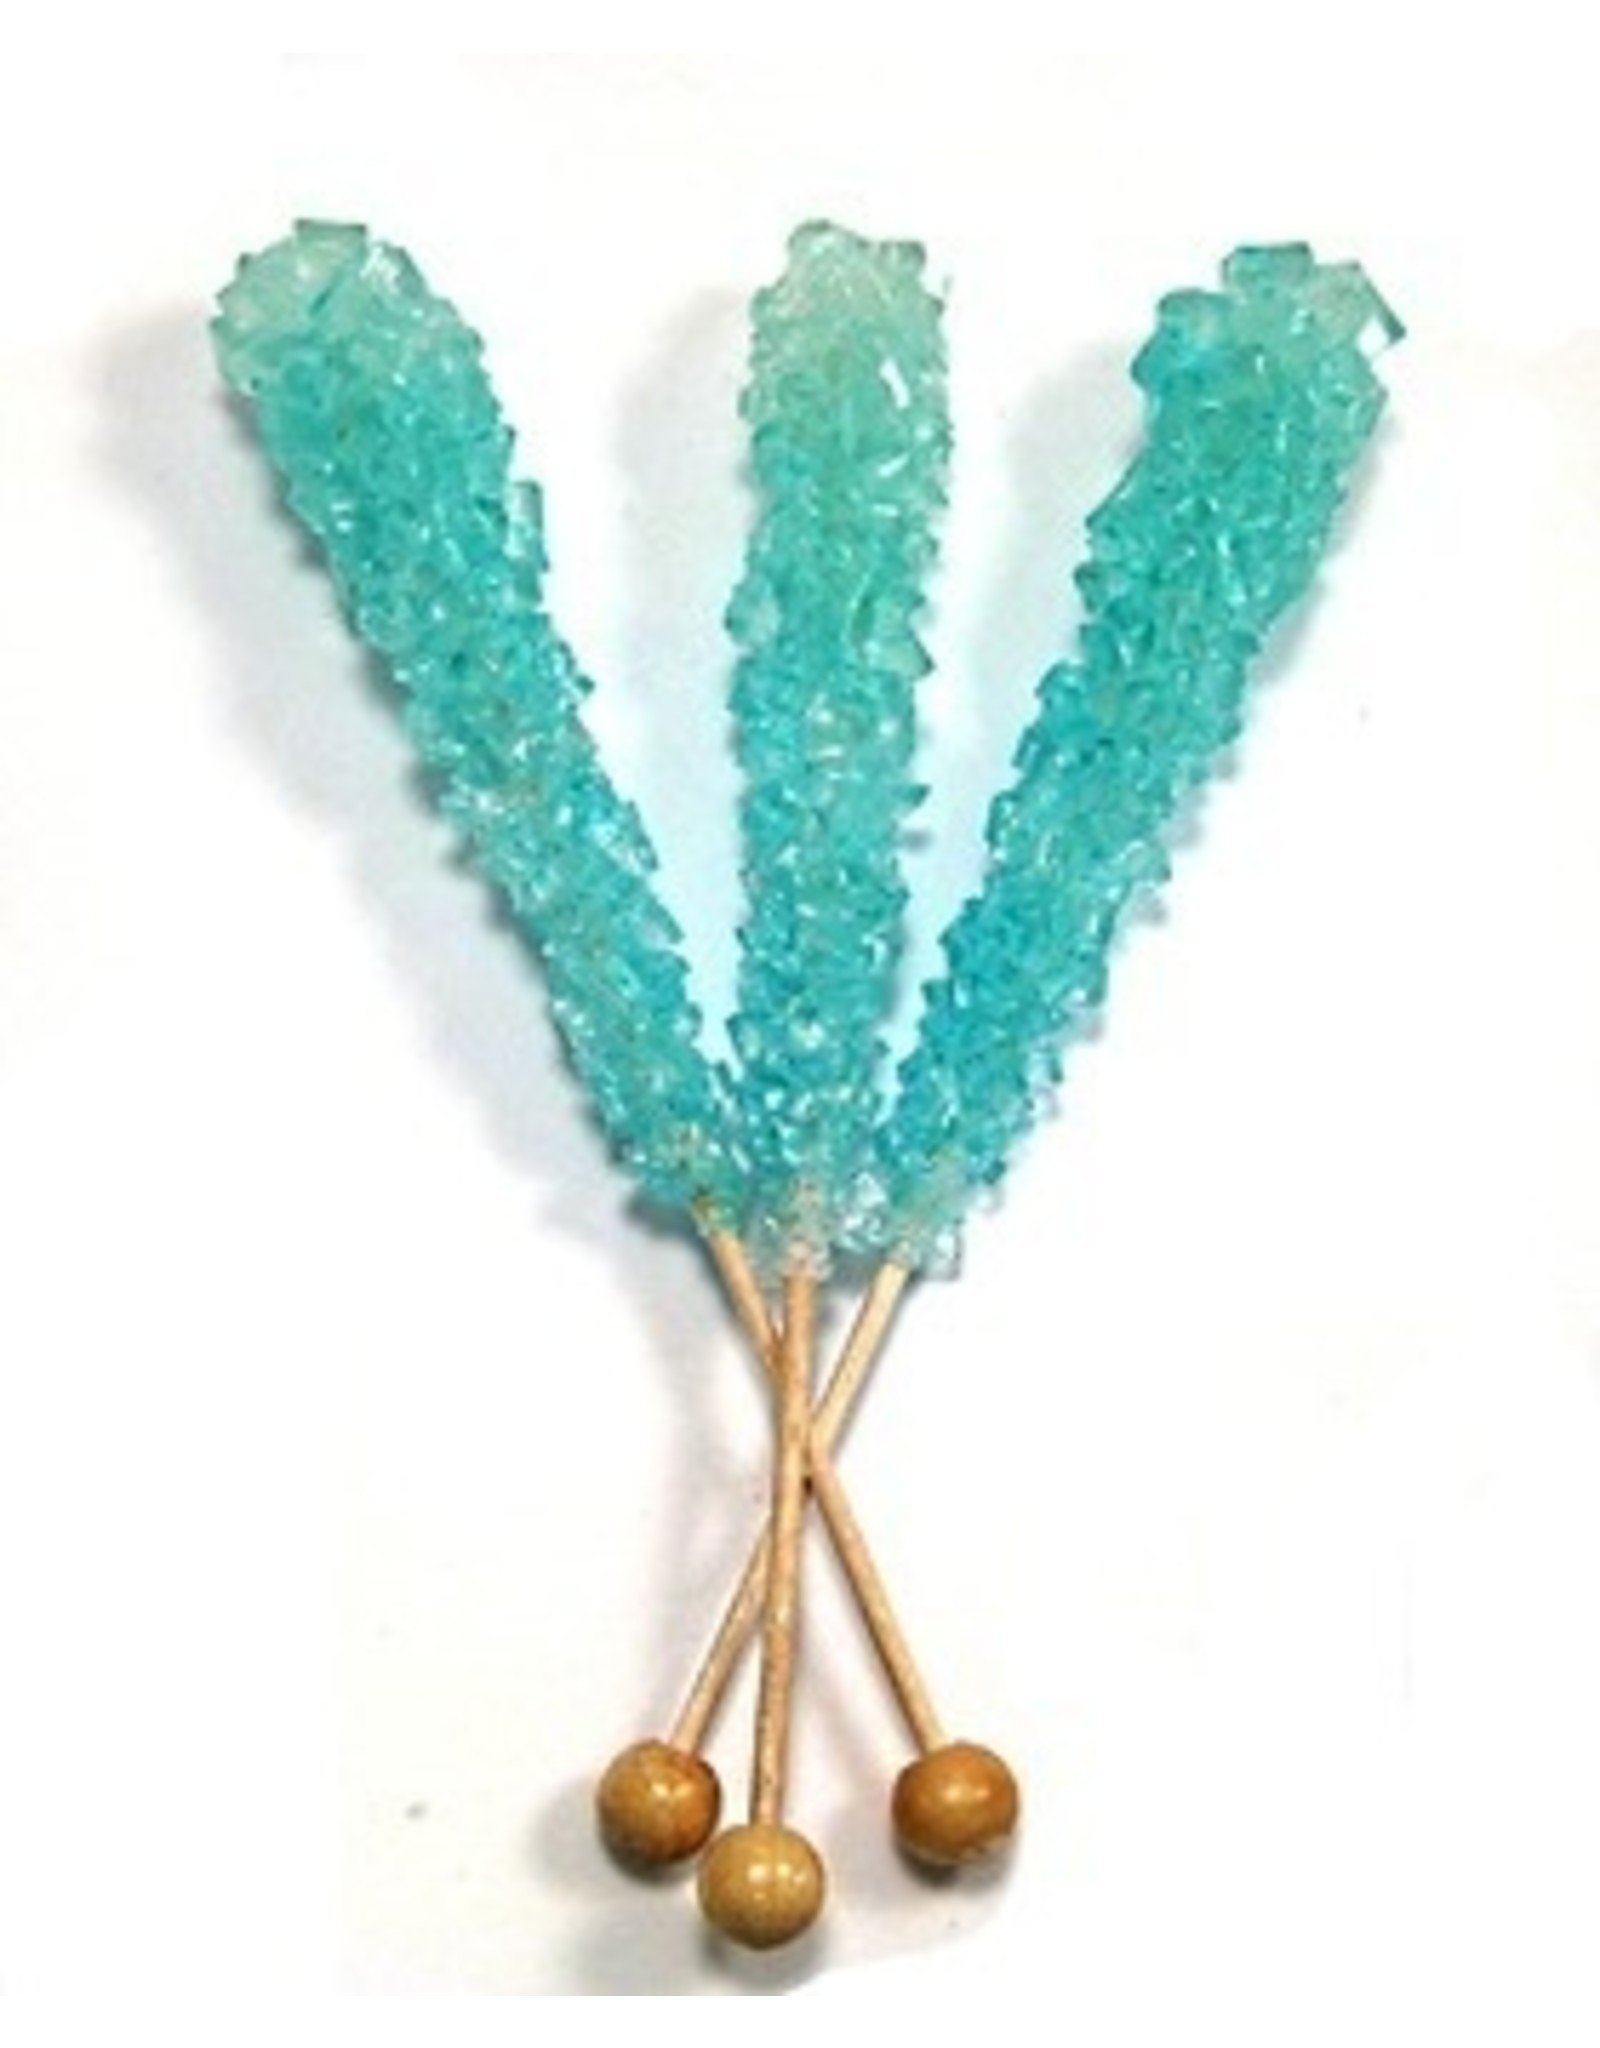 Caribbean Blue Rock Candy (Cotton Candy)